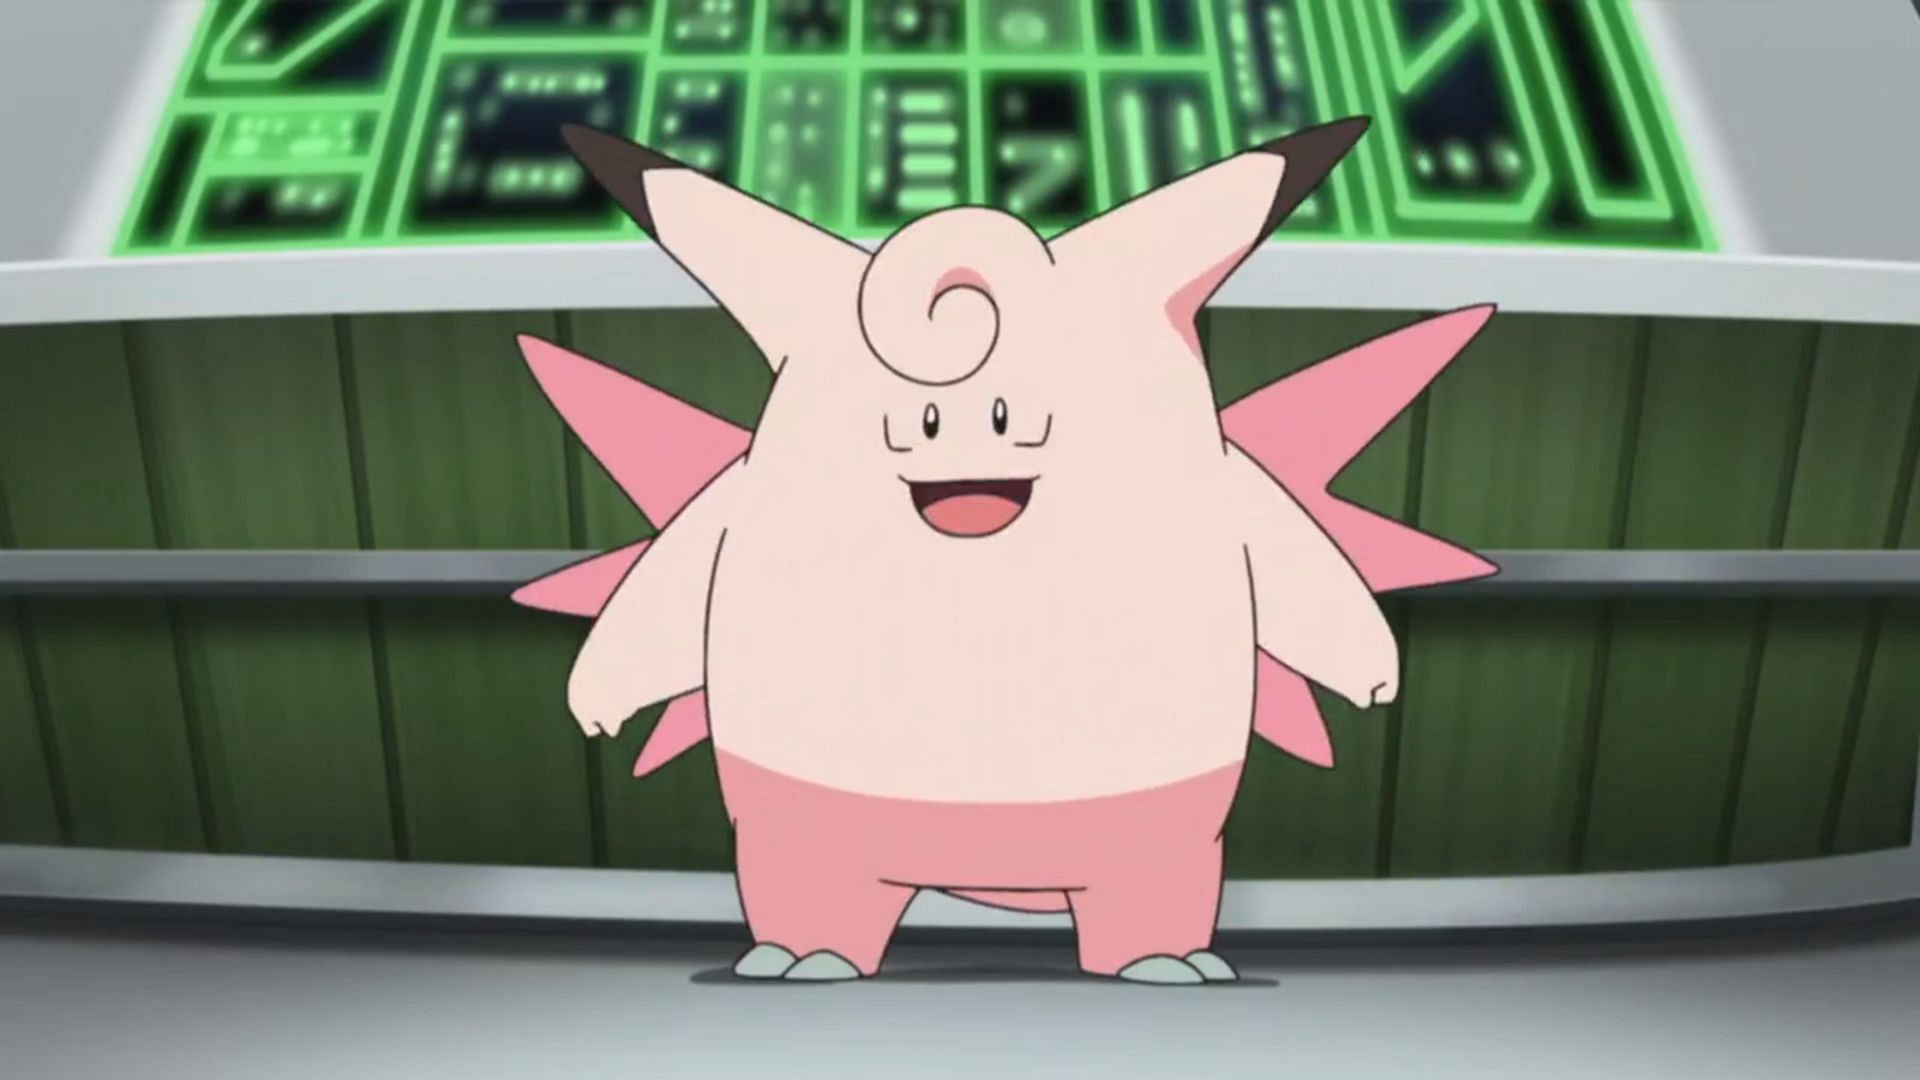 Aside from being a Fairy-type Pokemon, Clefable is classified in the Pokedex as a Fairy Pokemon (Image via The Pokemon Company)